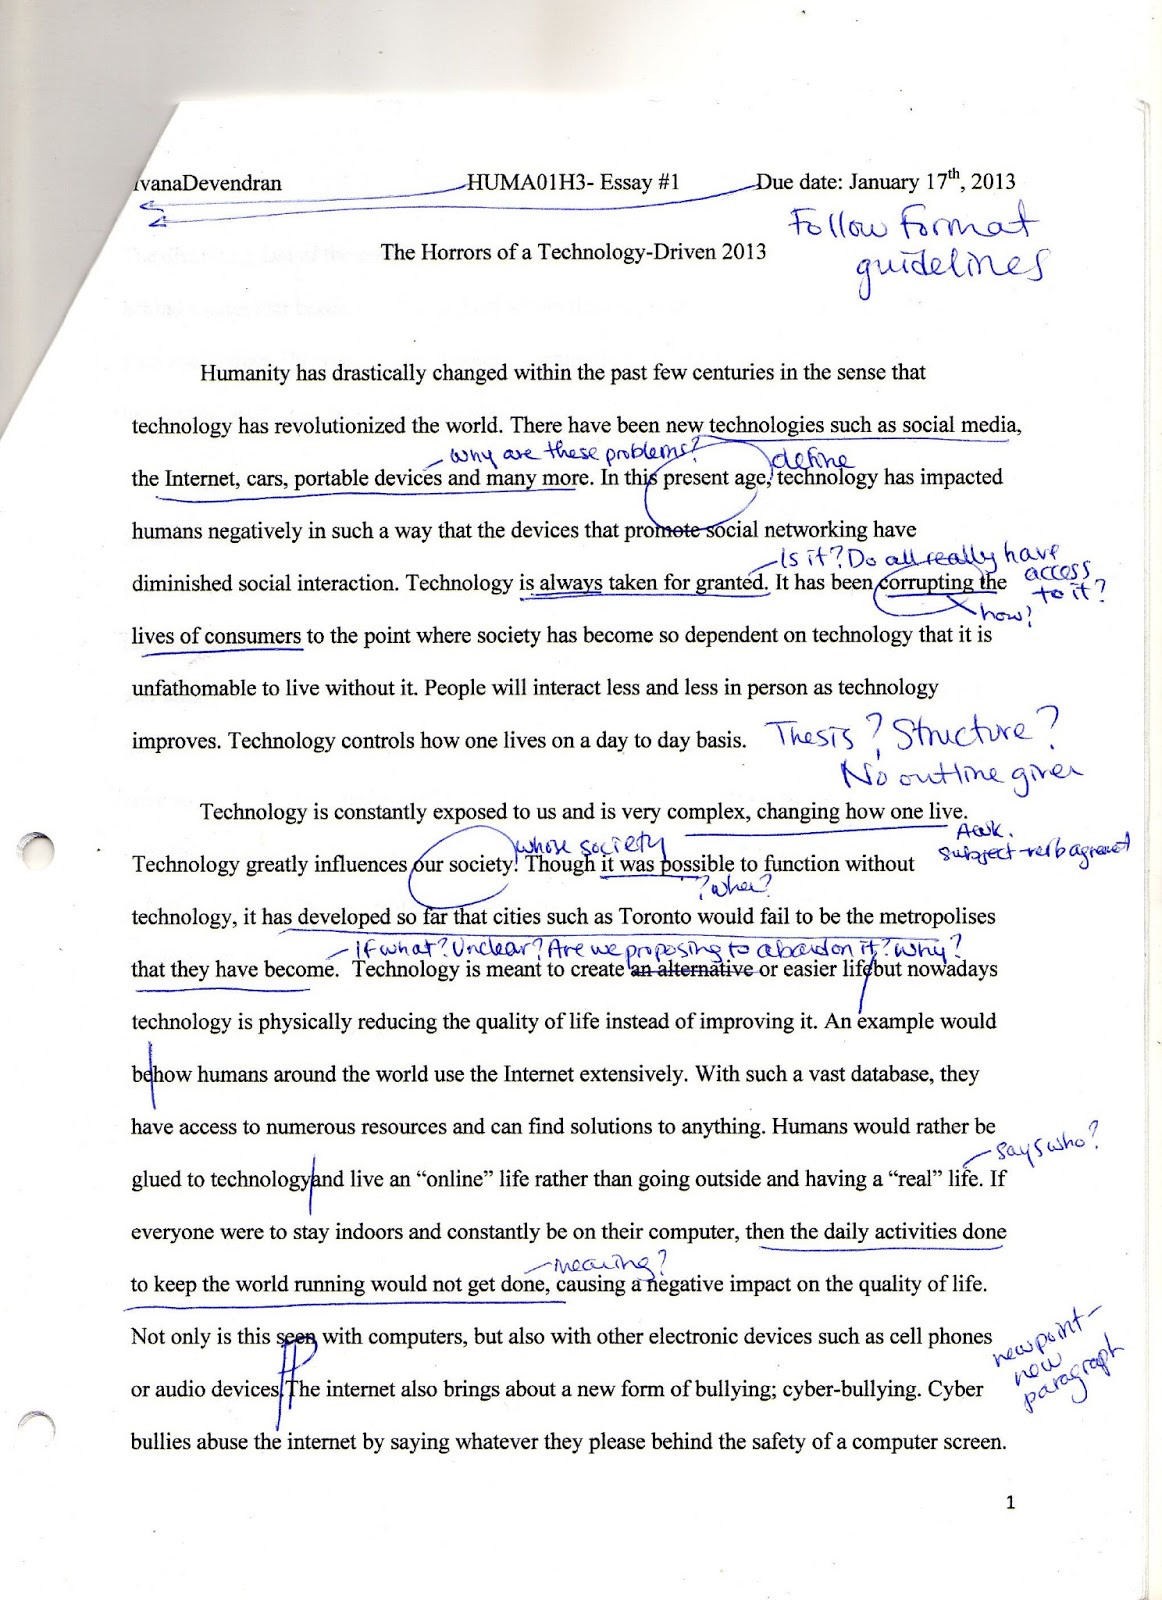 journal paper example